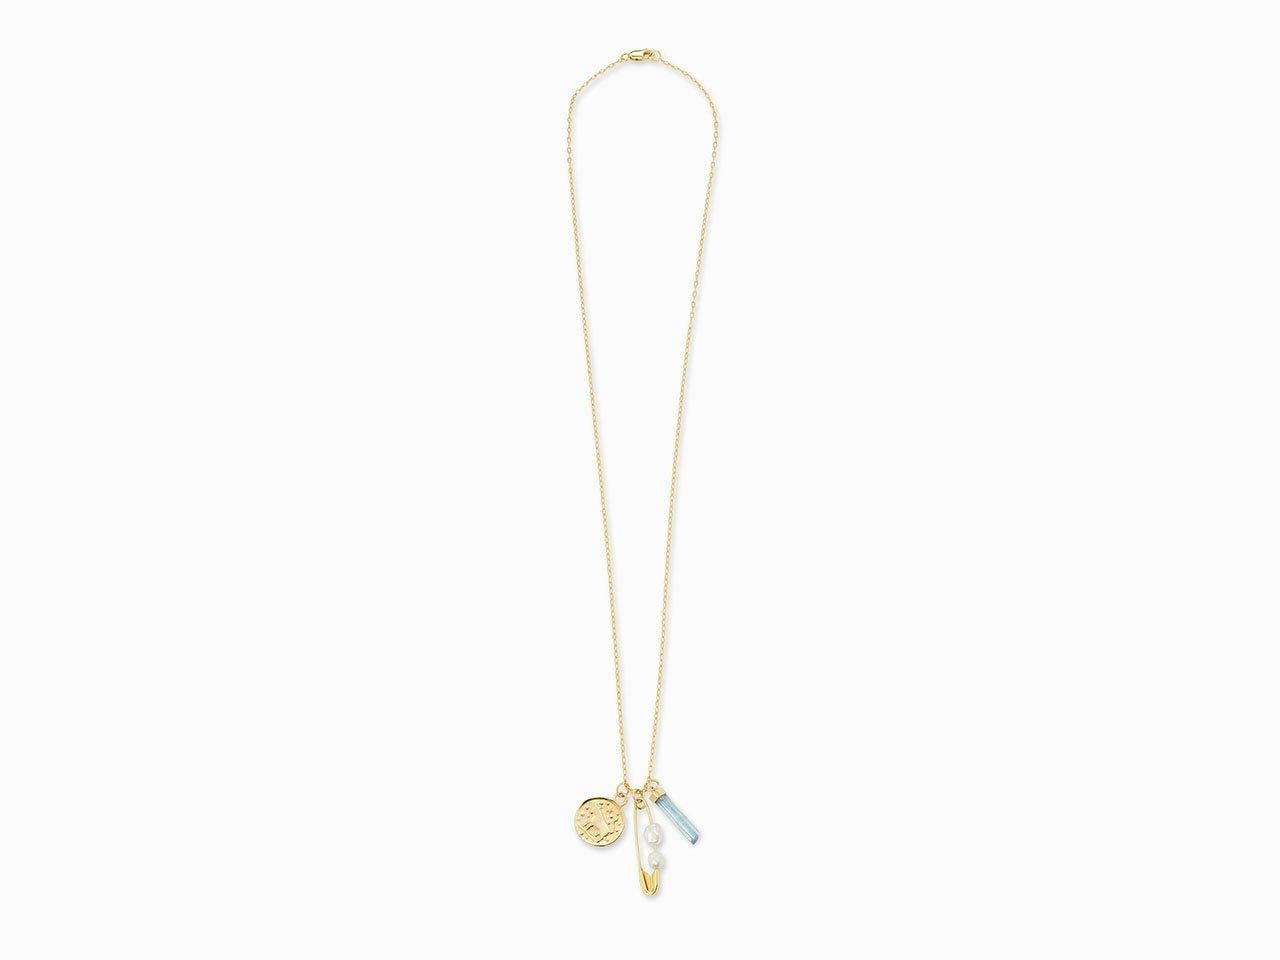 14k Yellow Gold Cable Chain Necklace (17.5 inch long), with a Zodiac charm pendant (*Taurus pictured), with a 14k Yellow Gold Safety Pin with 2 Natural Pearls, and Aquamarine charm with 14k Yellow gold setting. 
*Please let us know your Zodiac sign